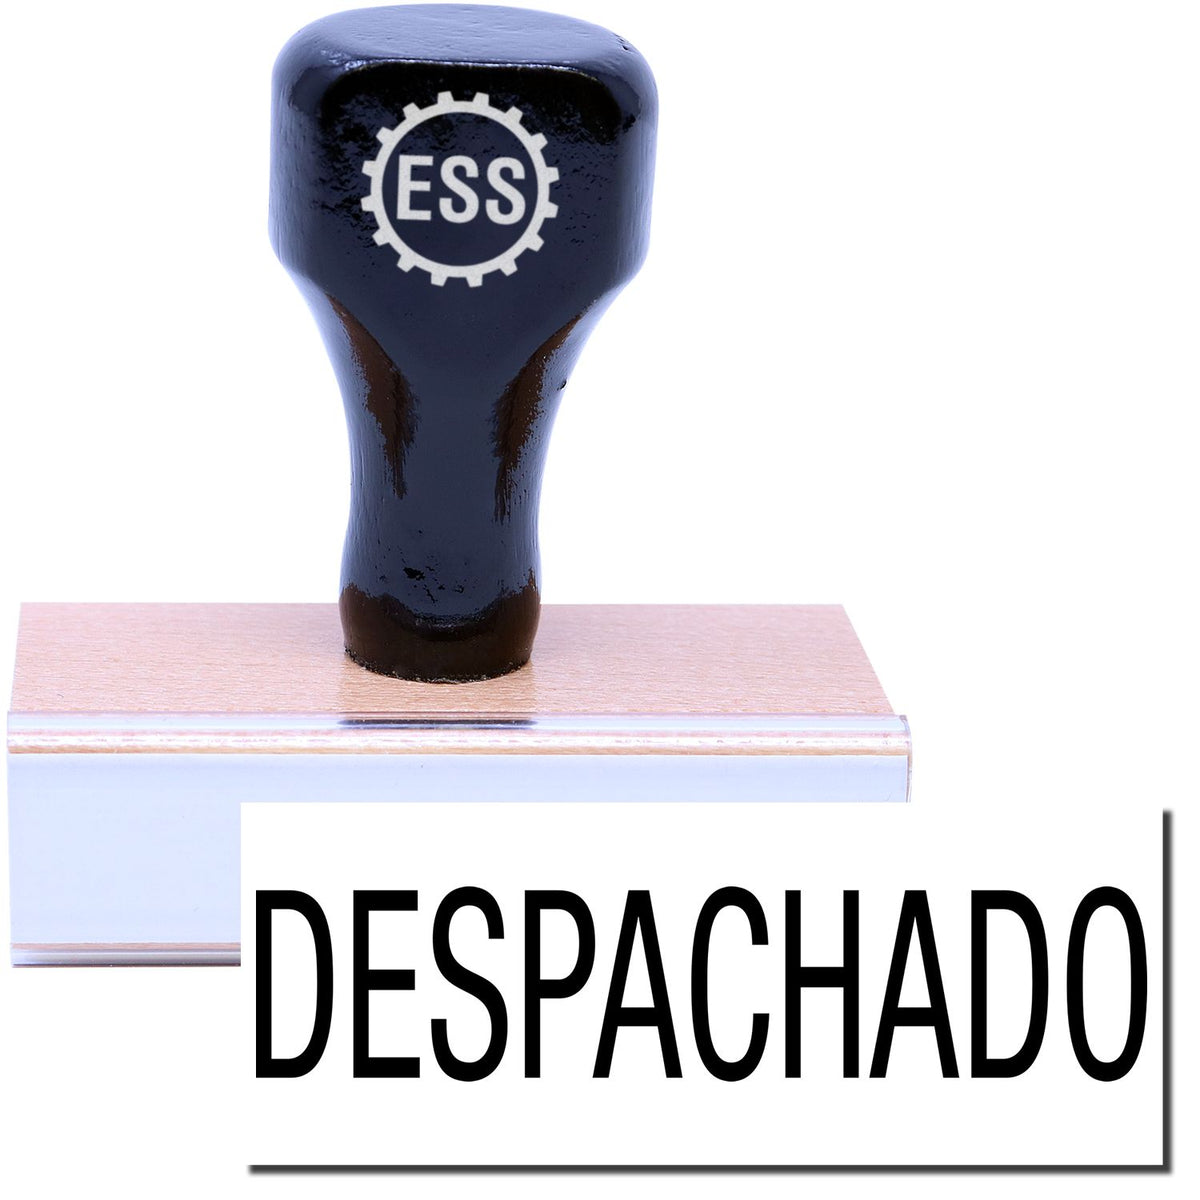 A stock office rubber stamp with a stamped image showing how the text &quot;DESPACHADO&quot; in a large font is displayed after stamping.